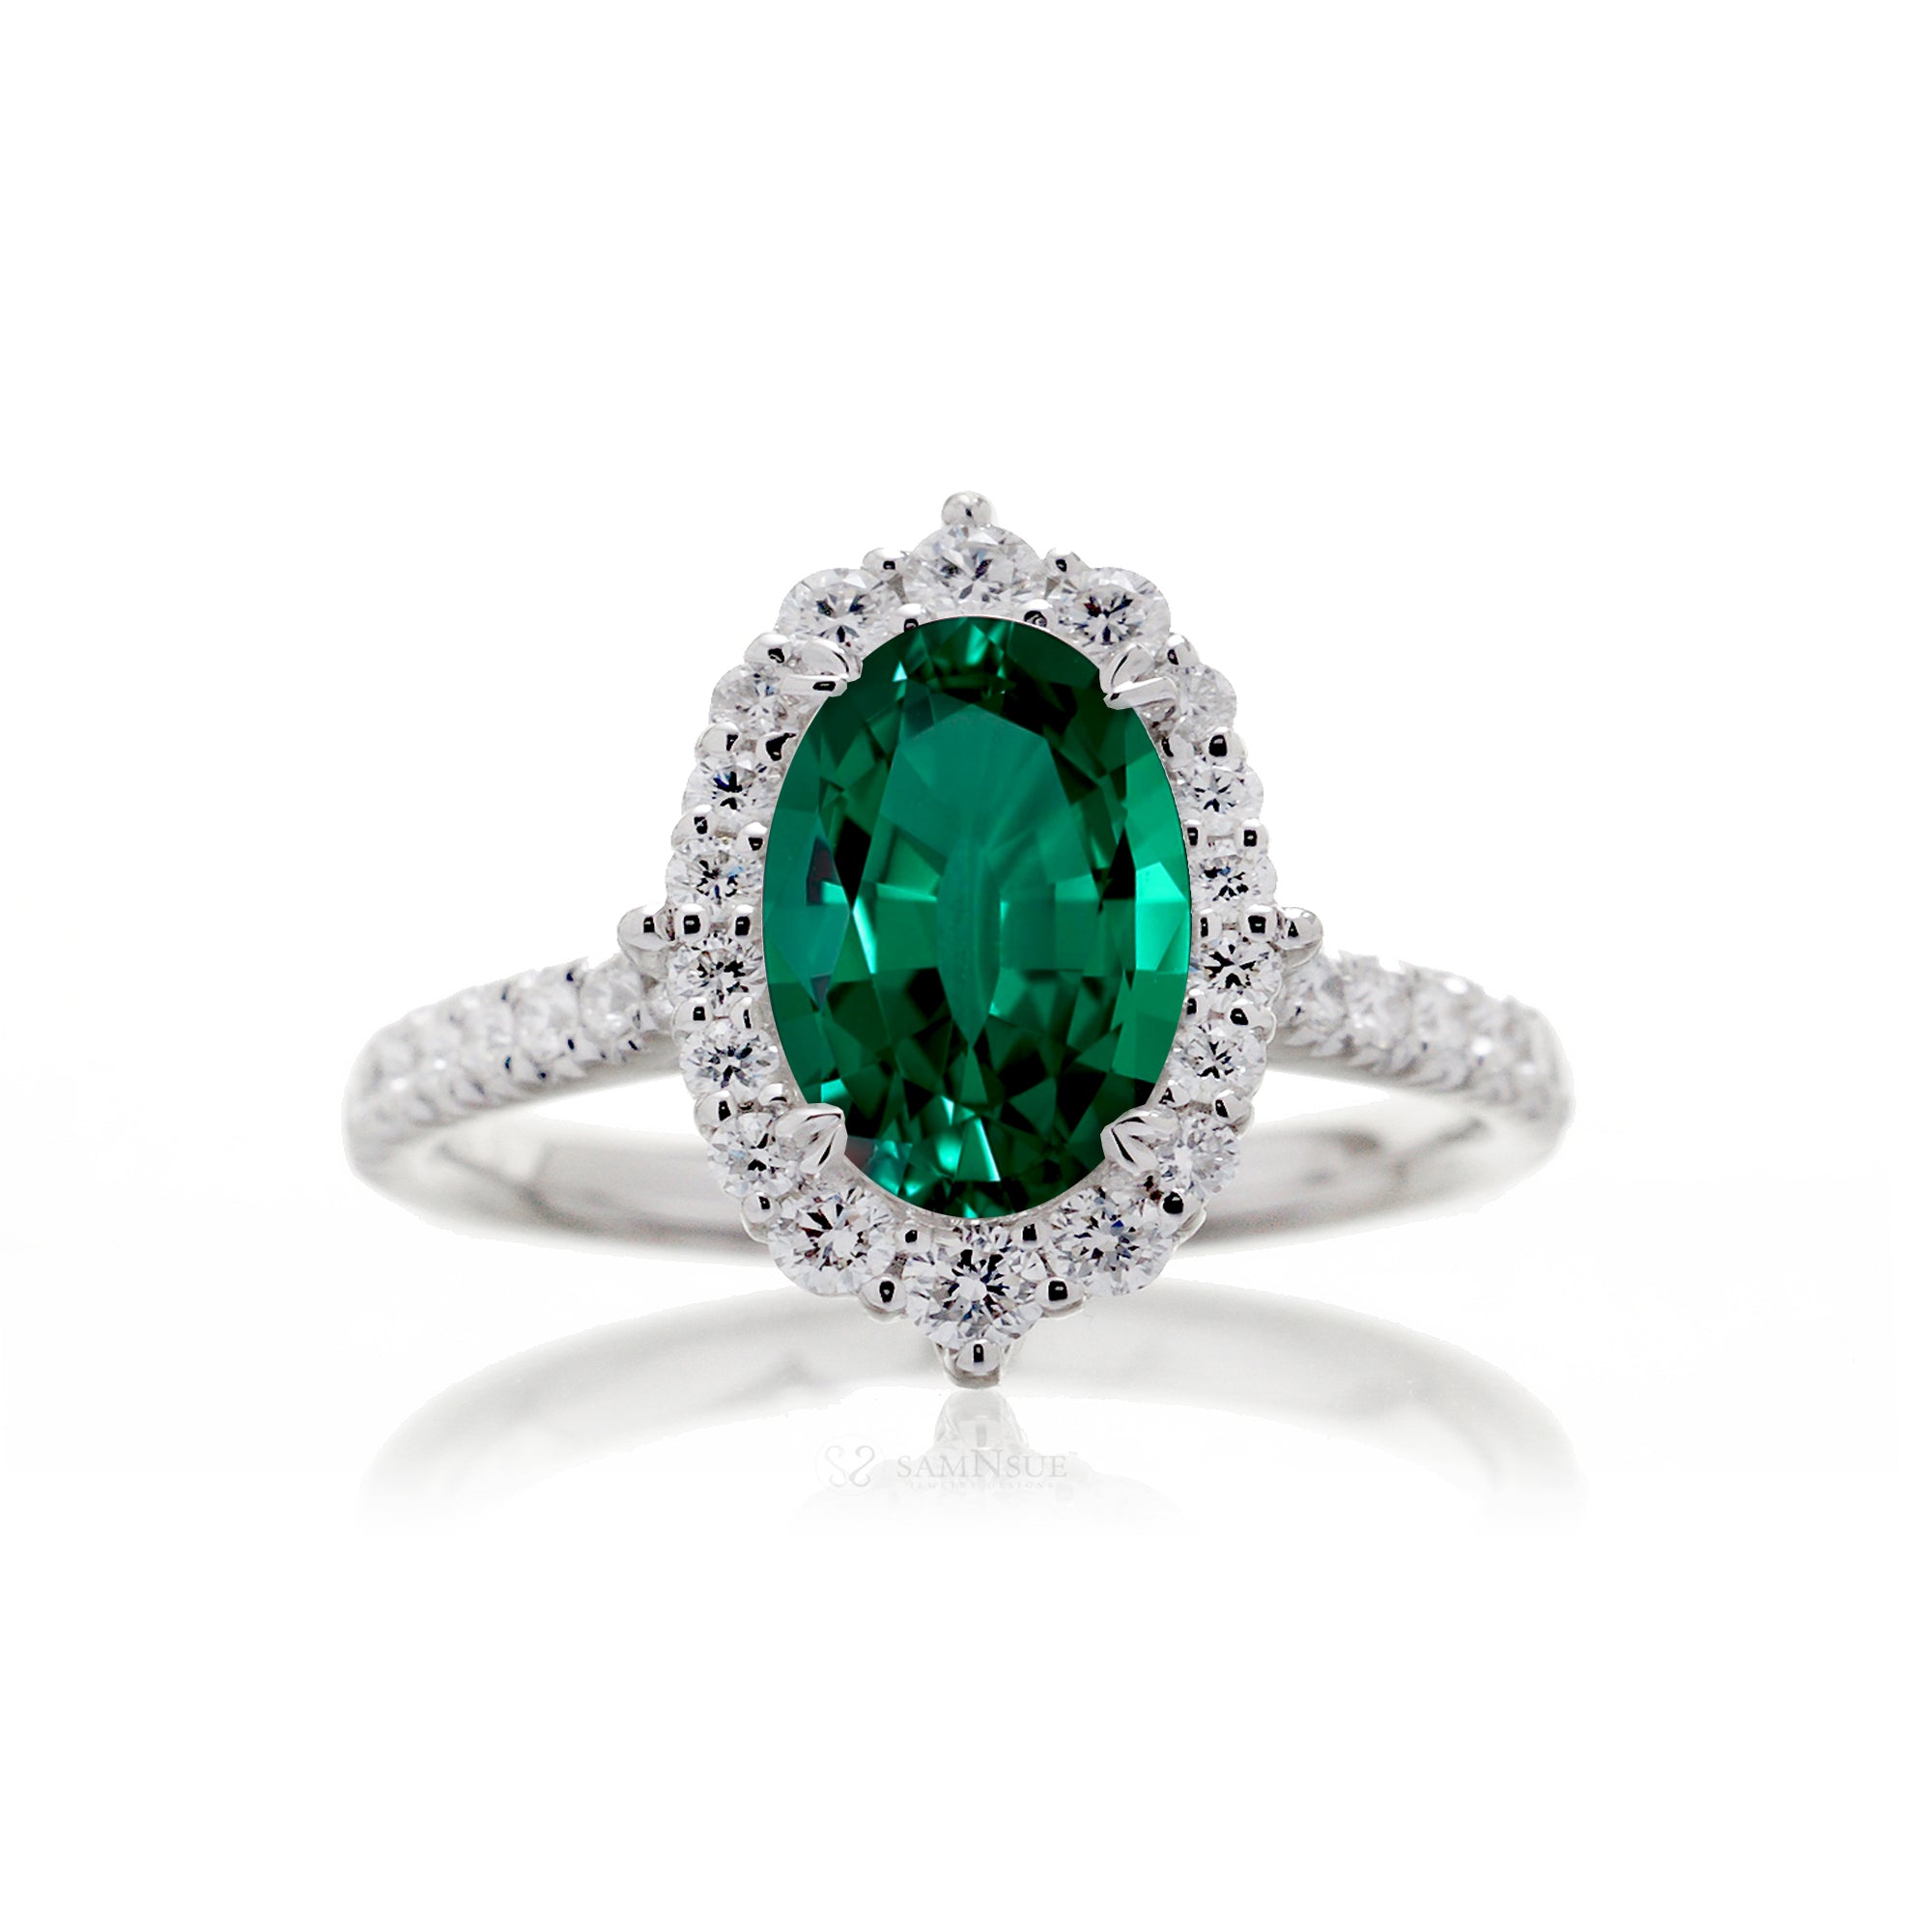 The Haley Oval Lab-Grown Green Emerald Ring